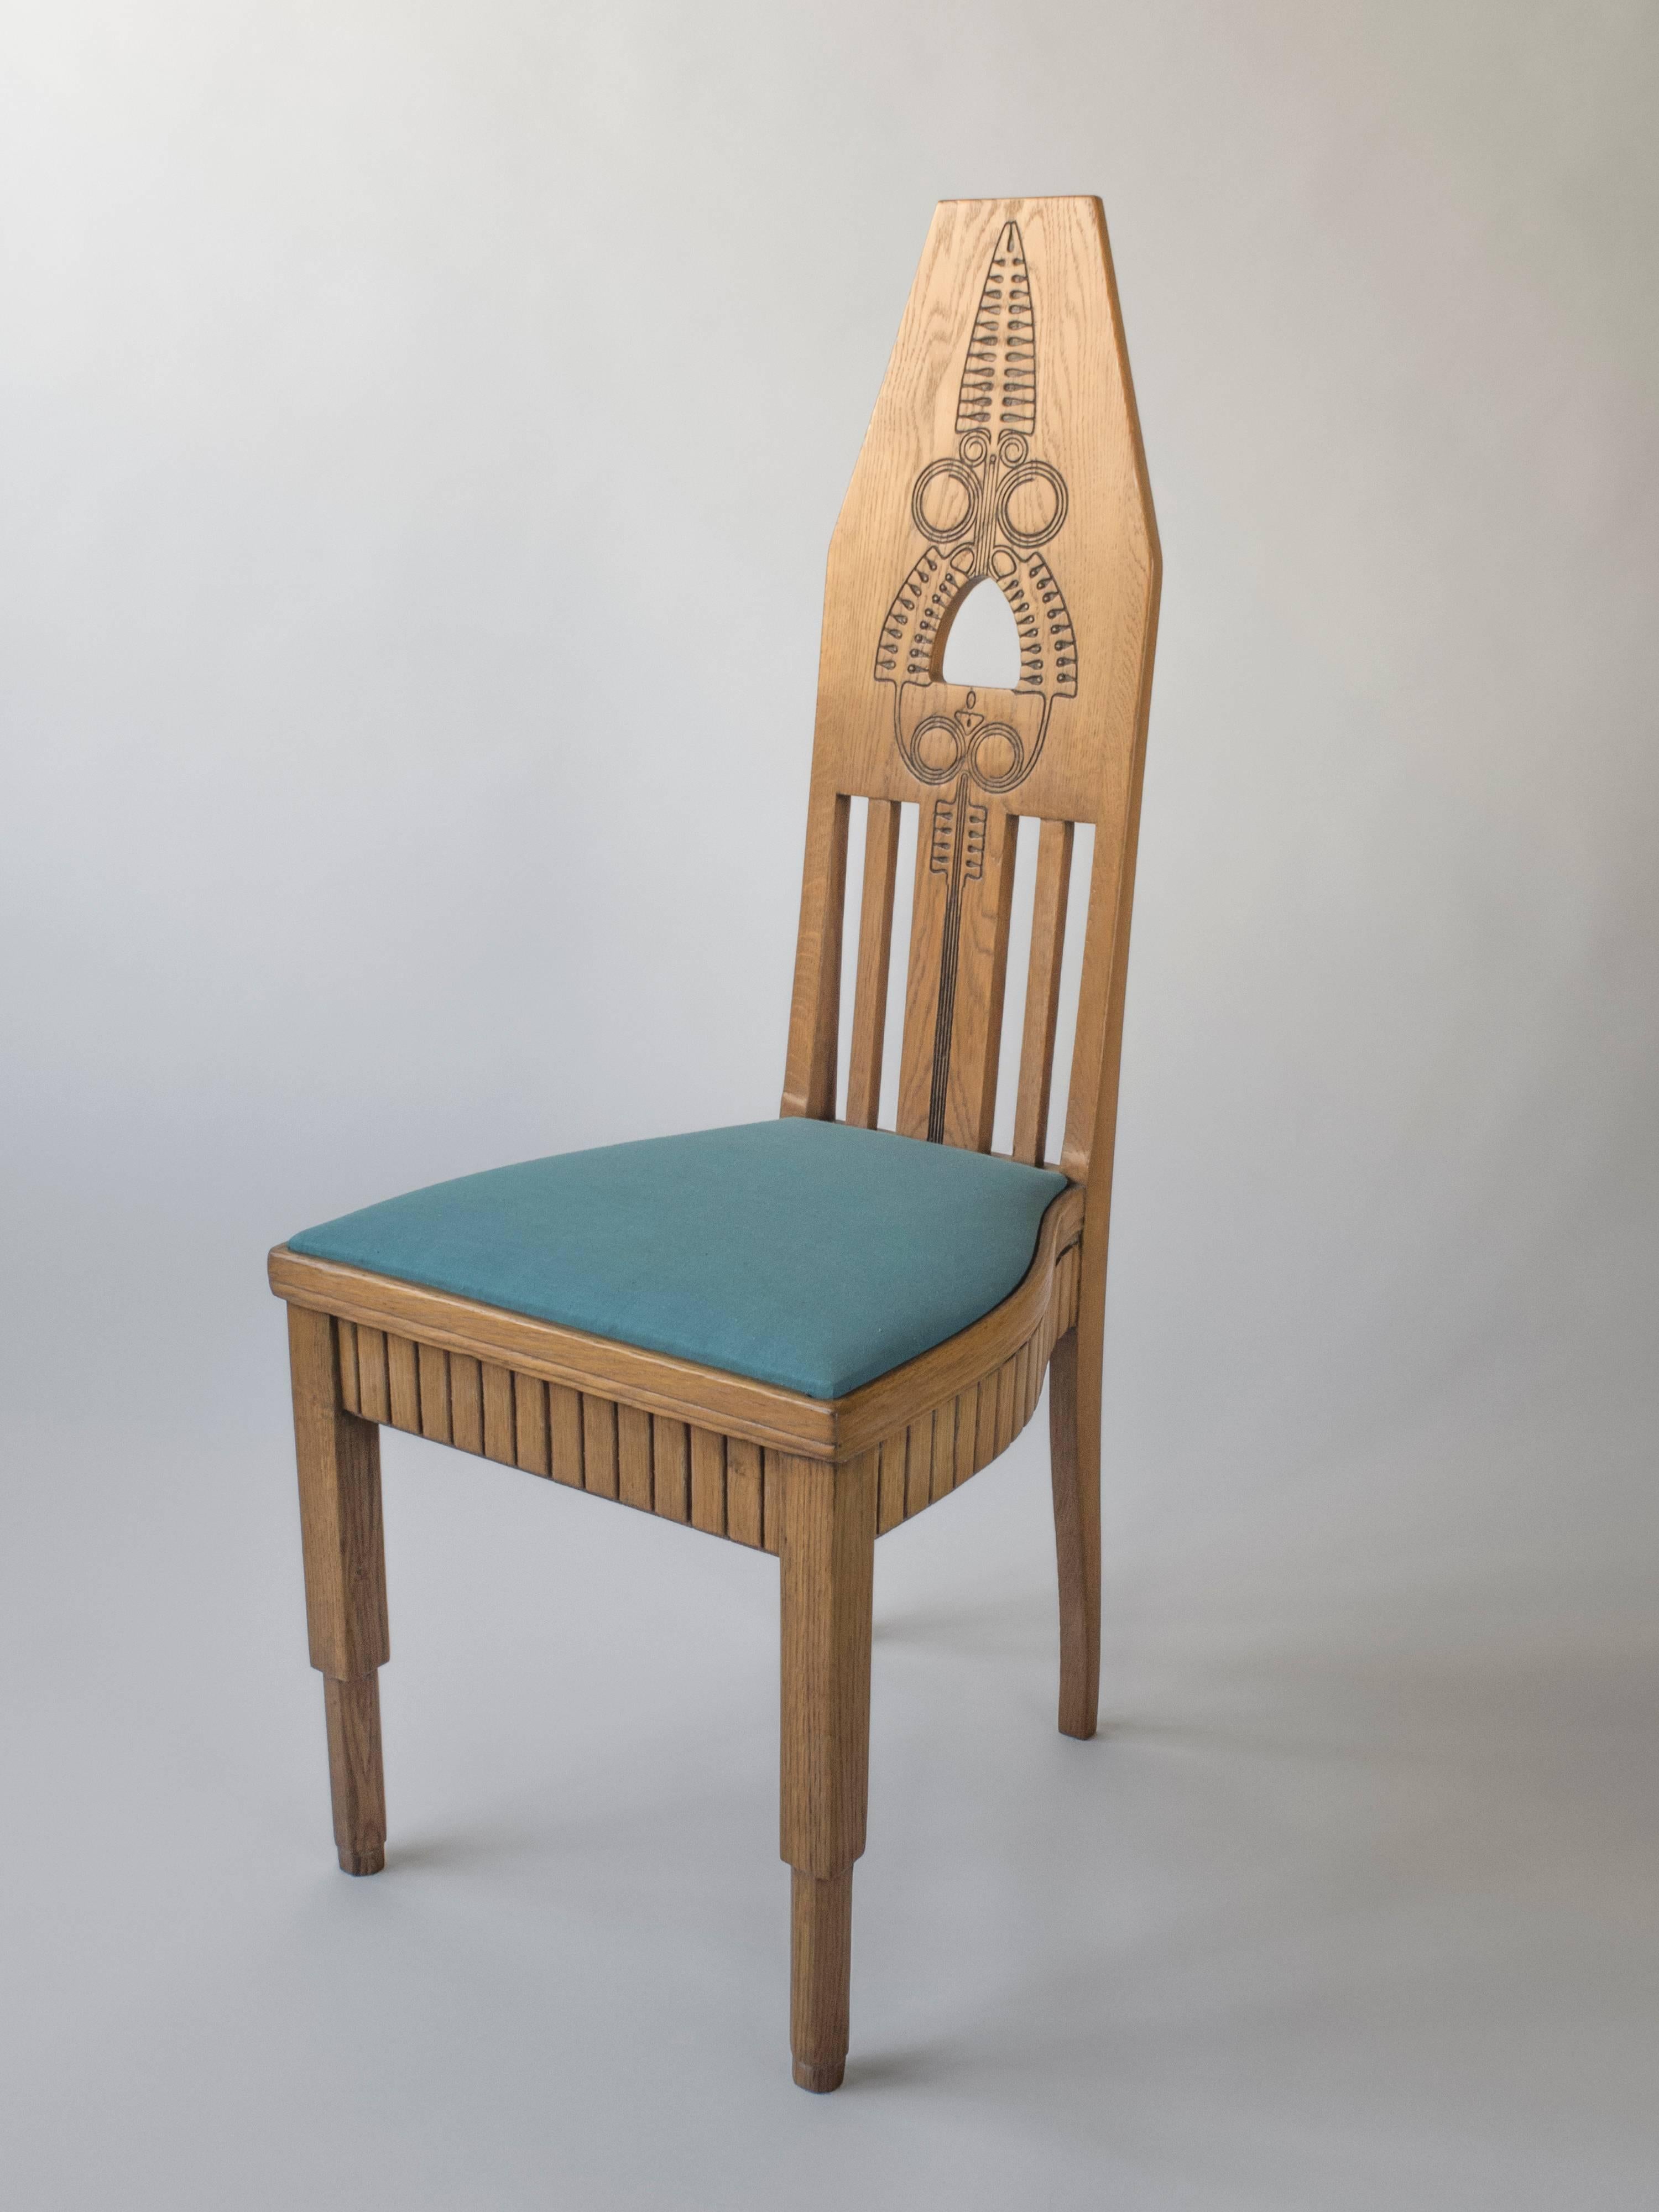 As typical of Nordic, and in particular Finnish Jugend / Art Nouveau works, the chairs boldly play on geometric forms and natural motifs. Each chair beautifully hand-carved. The linear top-rail, surmounting a tall and thin backrest adorned in